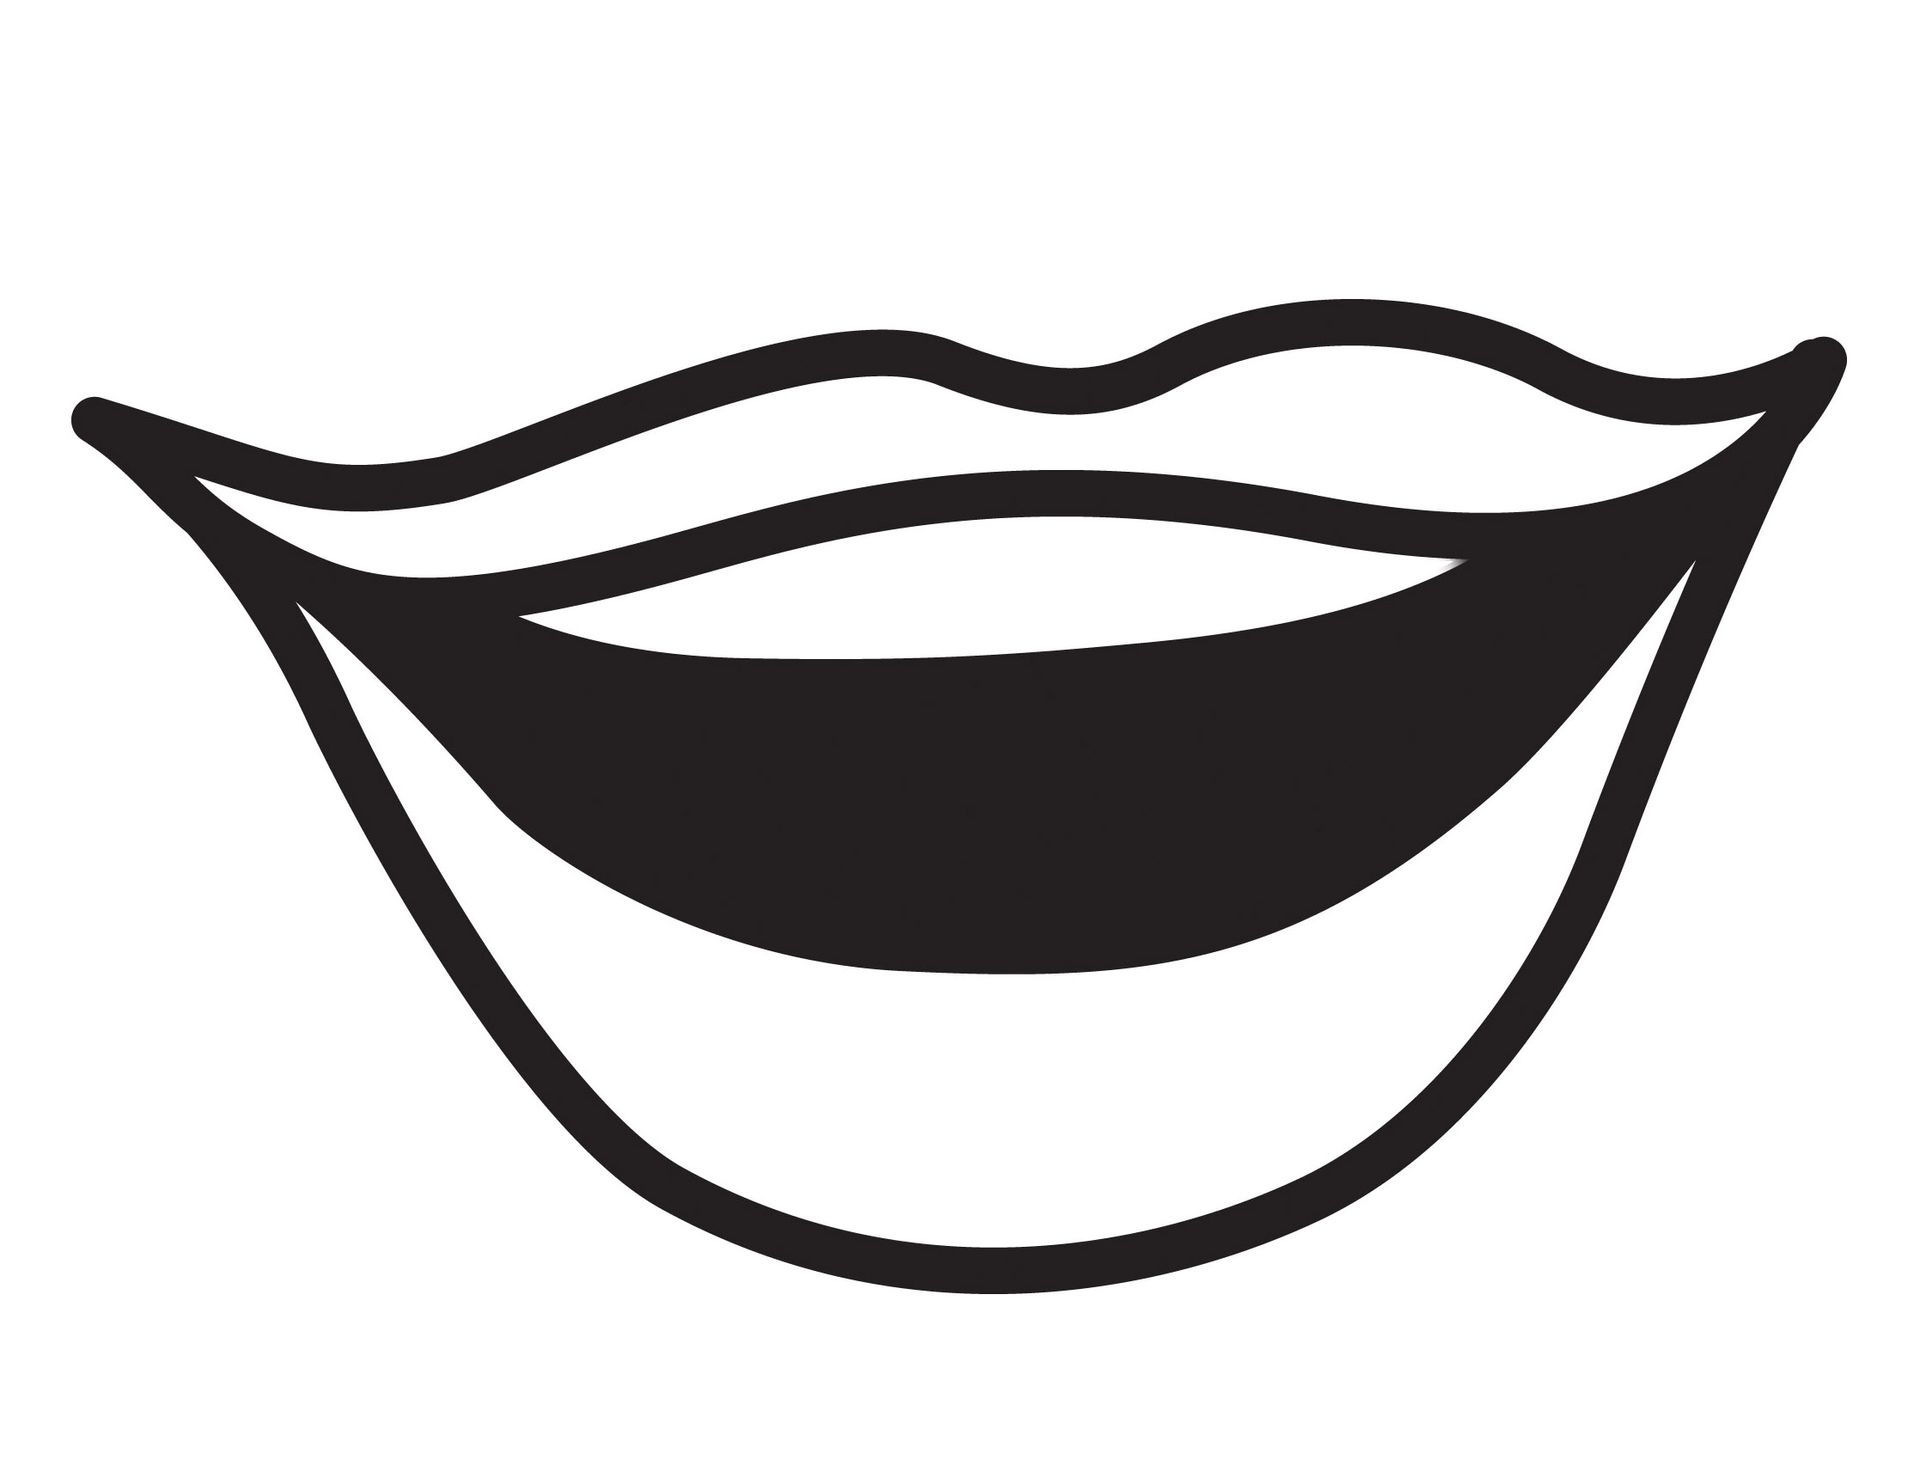 An illustration of an open mouth.